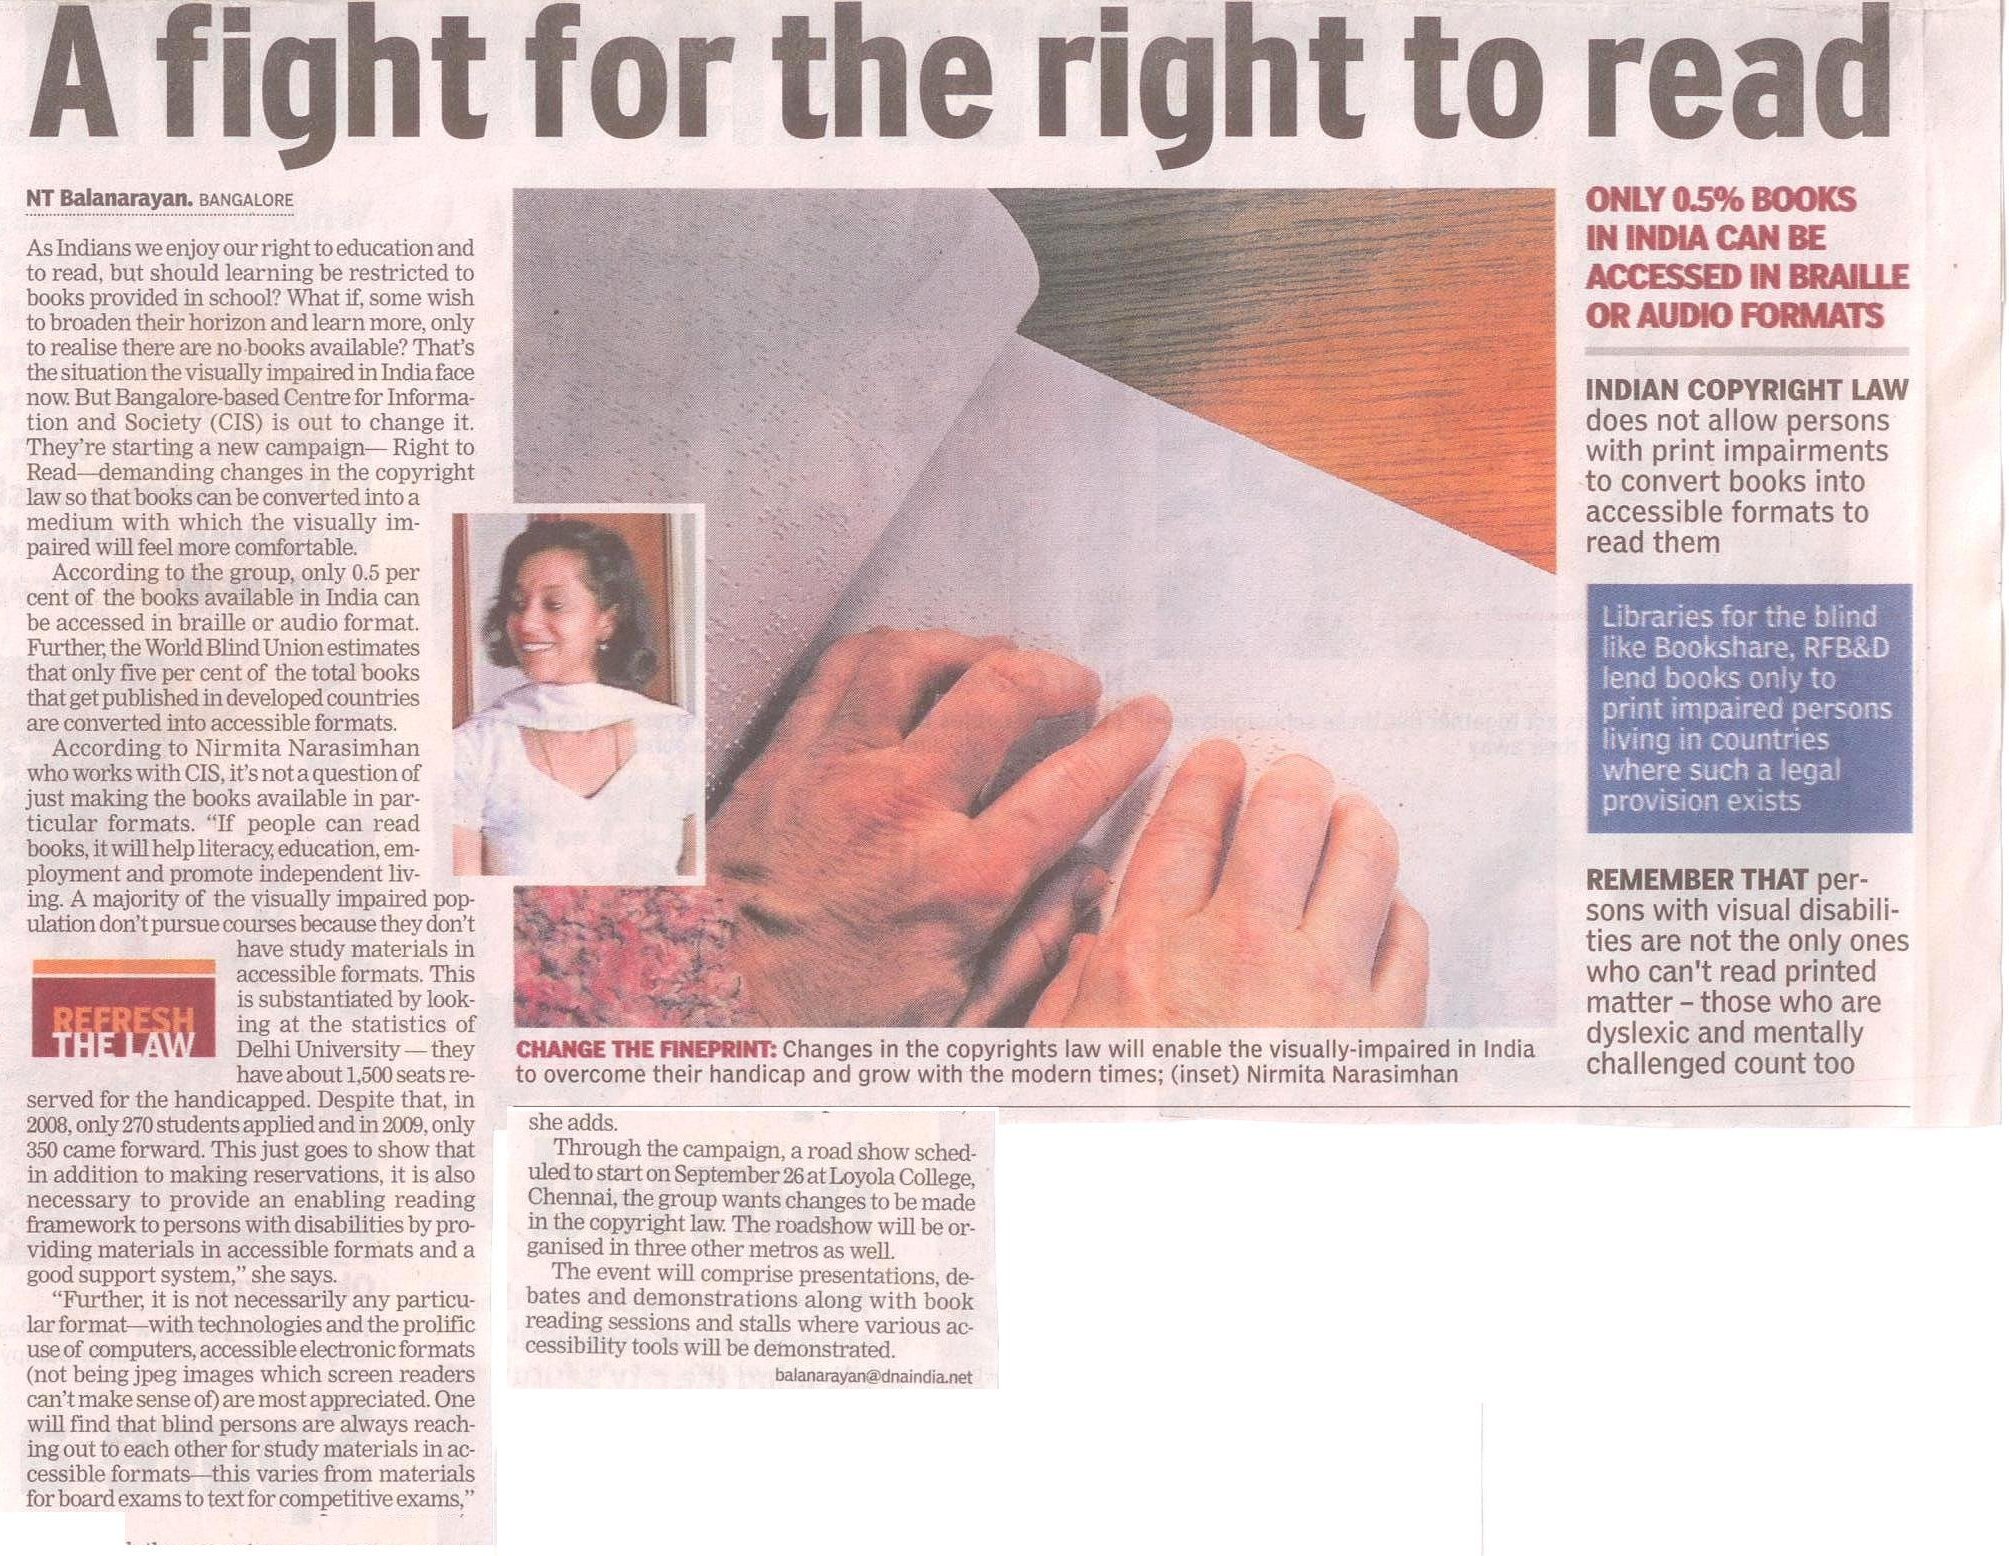 A fight for right to read